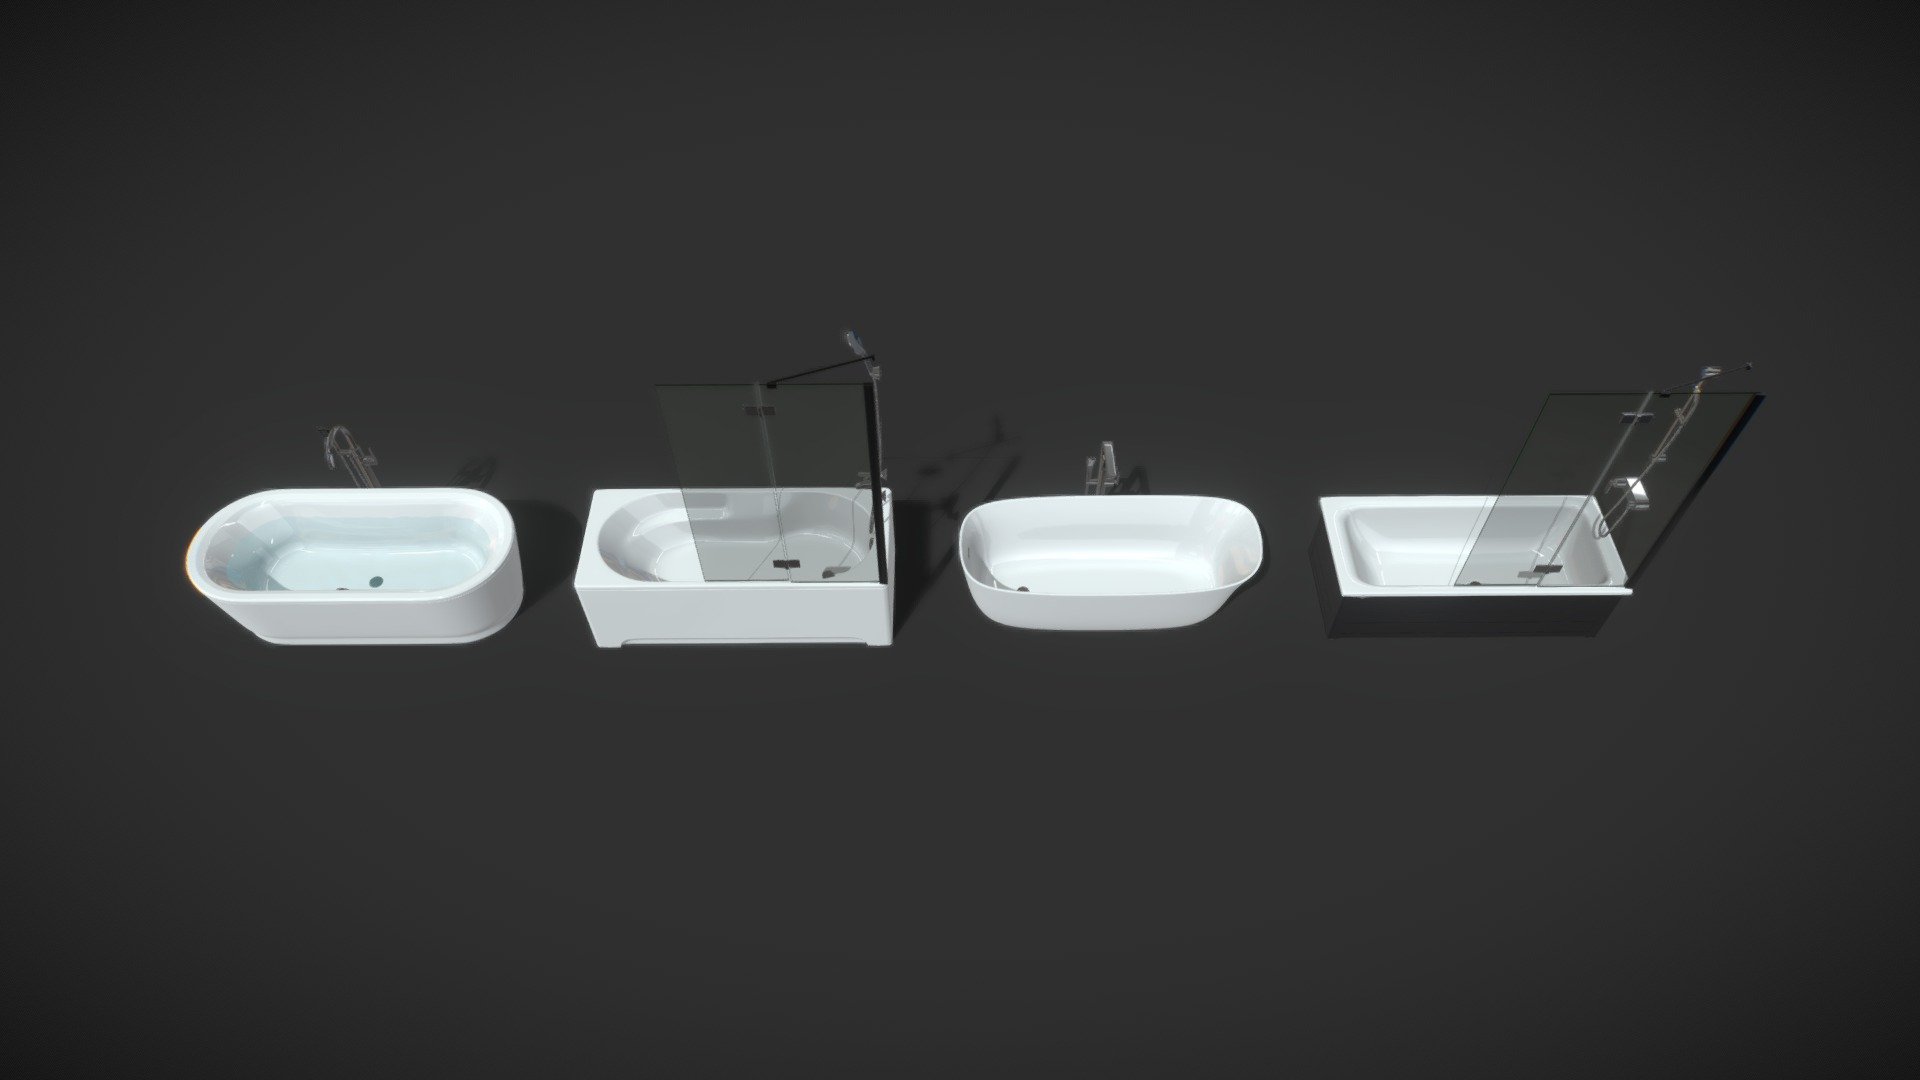 Realistic (copy) 3d model of Bath set 150 (Gustavsberg, Sanitana, Antoniolupi).

Topology of geometry:
- forms and proportions of The 3D model most similar to the real object
- the geometry of the model was created very neatly
- there are no many-sided polygons
- detailed enough for close-up renders

Materials and Textures:
- 3ds max files included Vray-Shaders
- 3ds max files included Corona-Shaders
- all texture paths are cleared

Organization of scene:
- to all objects and materials names in scene are appropriated
- real world size (system units - mm)
- coordinates of location of the model in space (x0, y0, z0)
- does not contain extraneous or hidden objects (lights, cameras, shapes etc.)

File Formats:
- original file format - 3ds max 2013 + Vray
- 3ds max 2013 Corona
- obj
- 3ds - Bath set 150 Gustavsberg, Sanitana, Antoniolupi - Buy Royalty Free 3D model by madMIX 3d model